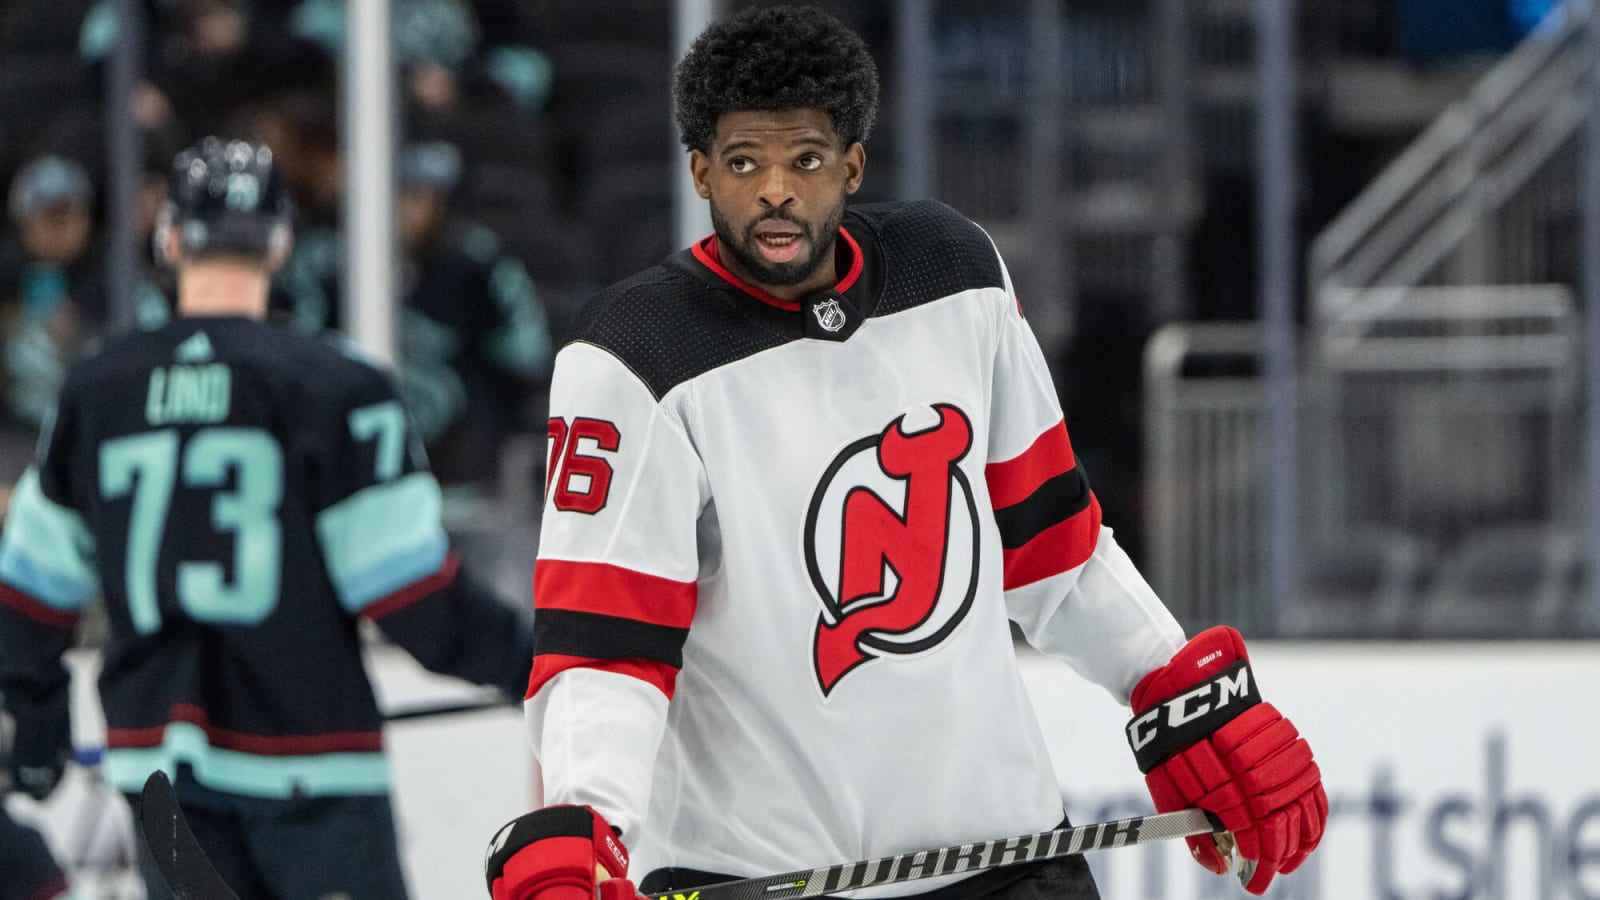 P.K. Subban joins ESPN as full-time NHL analyst